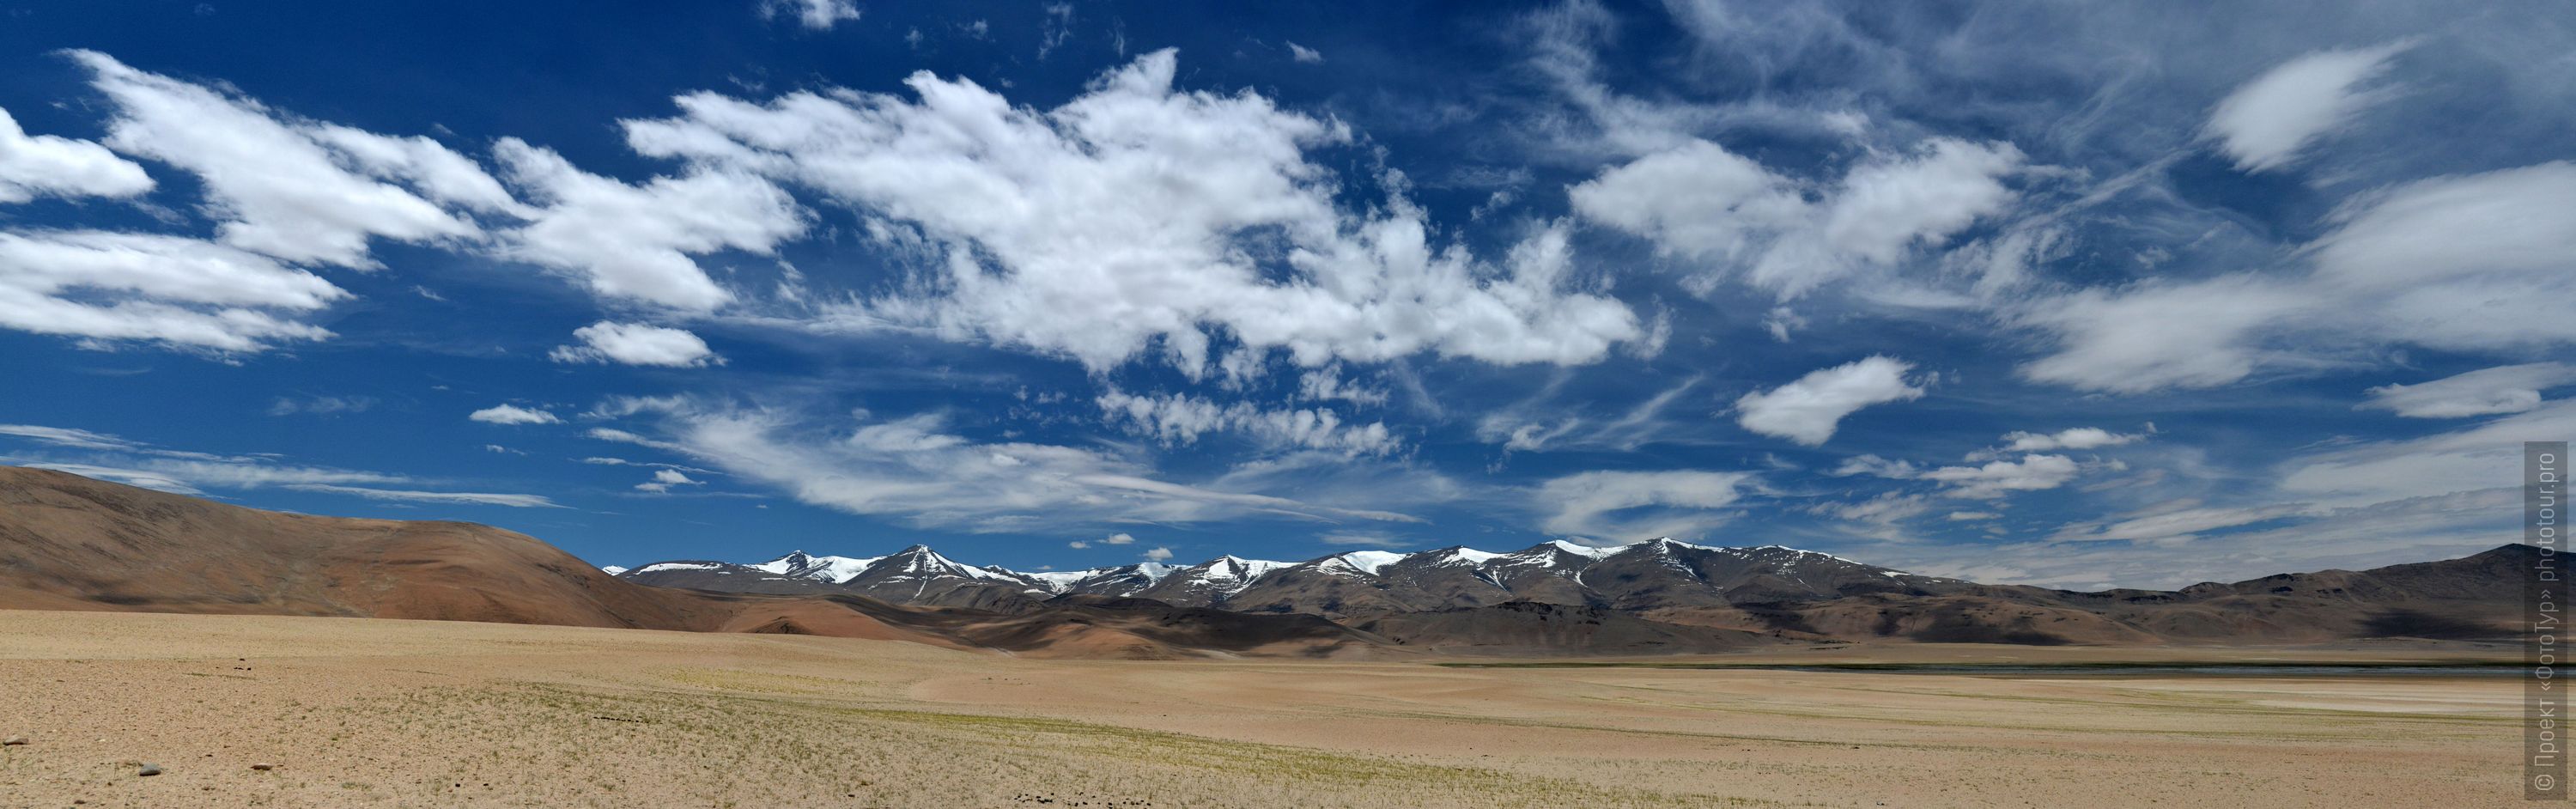 View of the Rupshu Valley from the Taglung La Pass, Ladakh. Tour Tibet Lakeside Advertising: Alpine lakes, geyser valley, Lamayuru, Colored Mountains, 01 - 10.09. 2023 year.